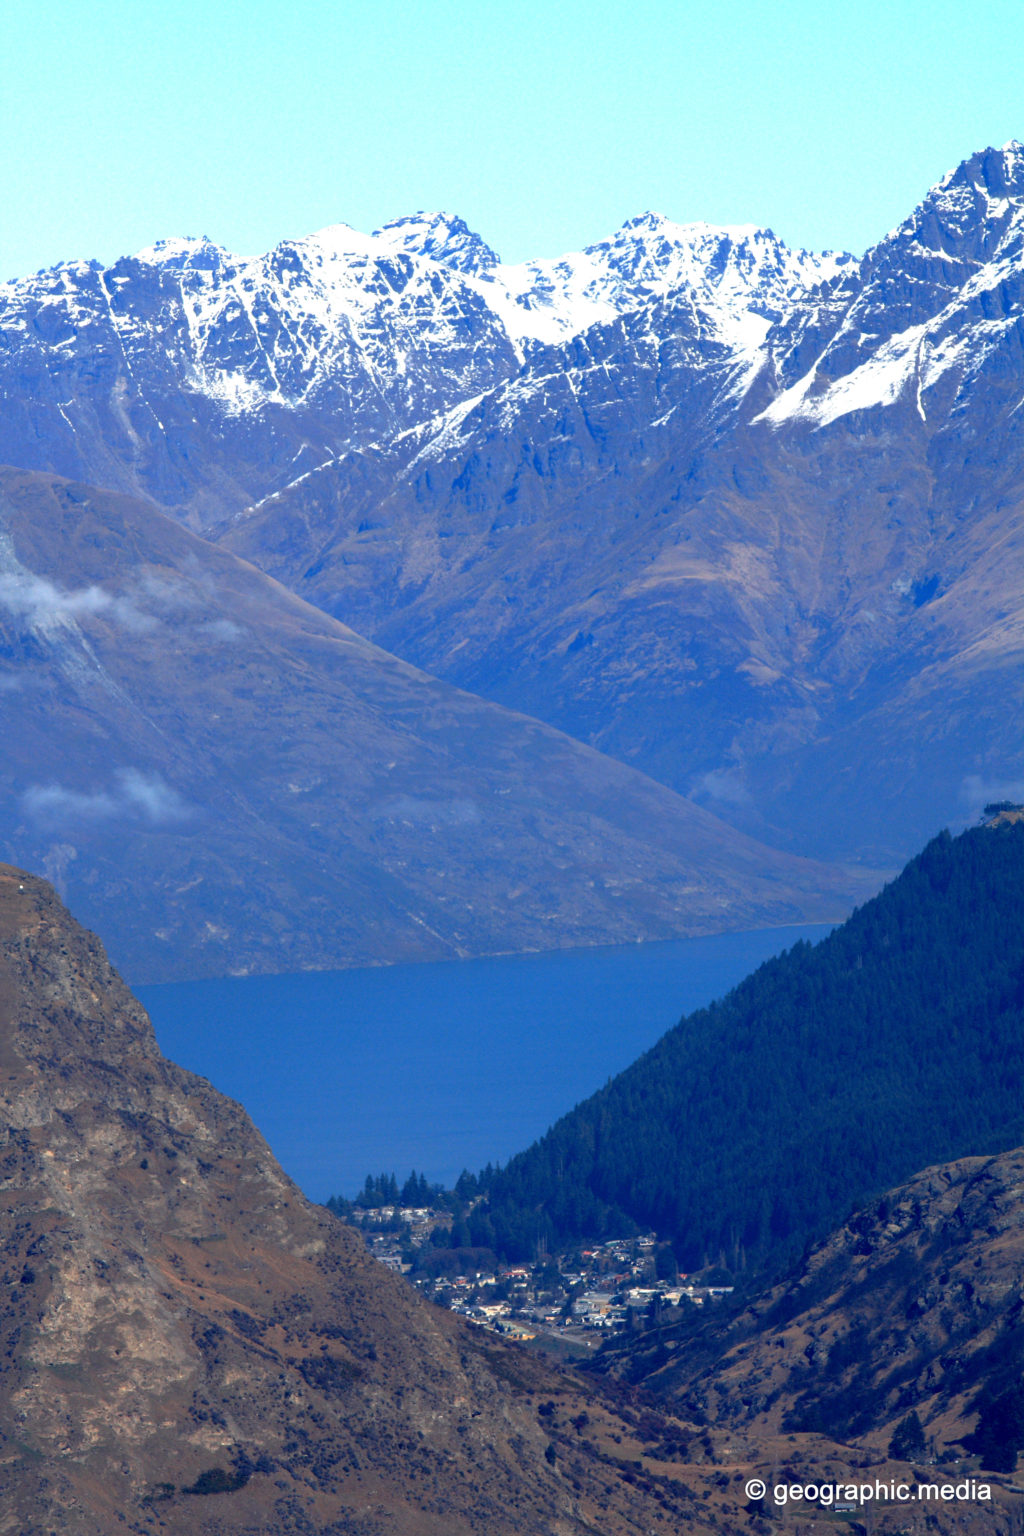 Queenstown Mountains Geographic Media